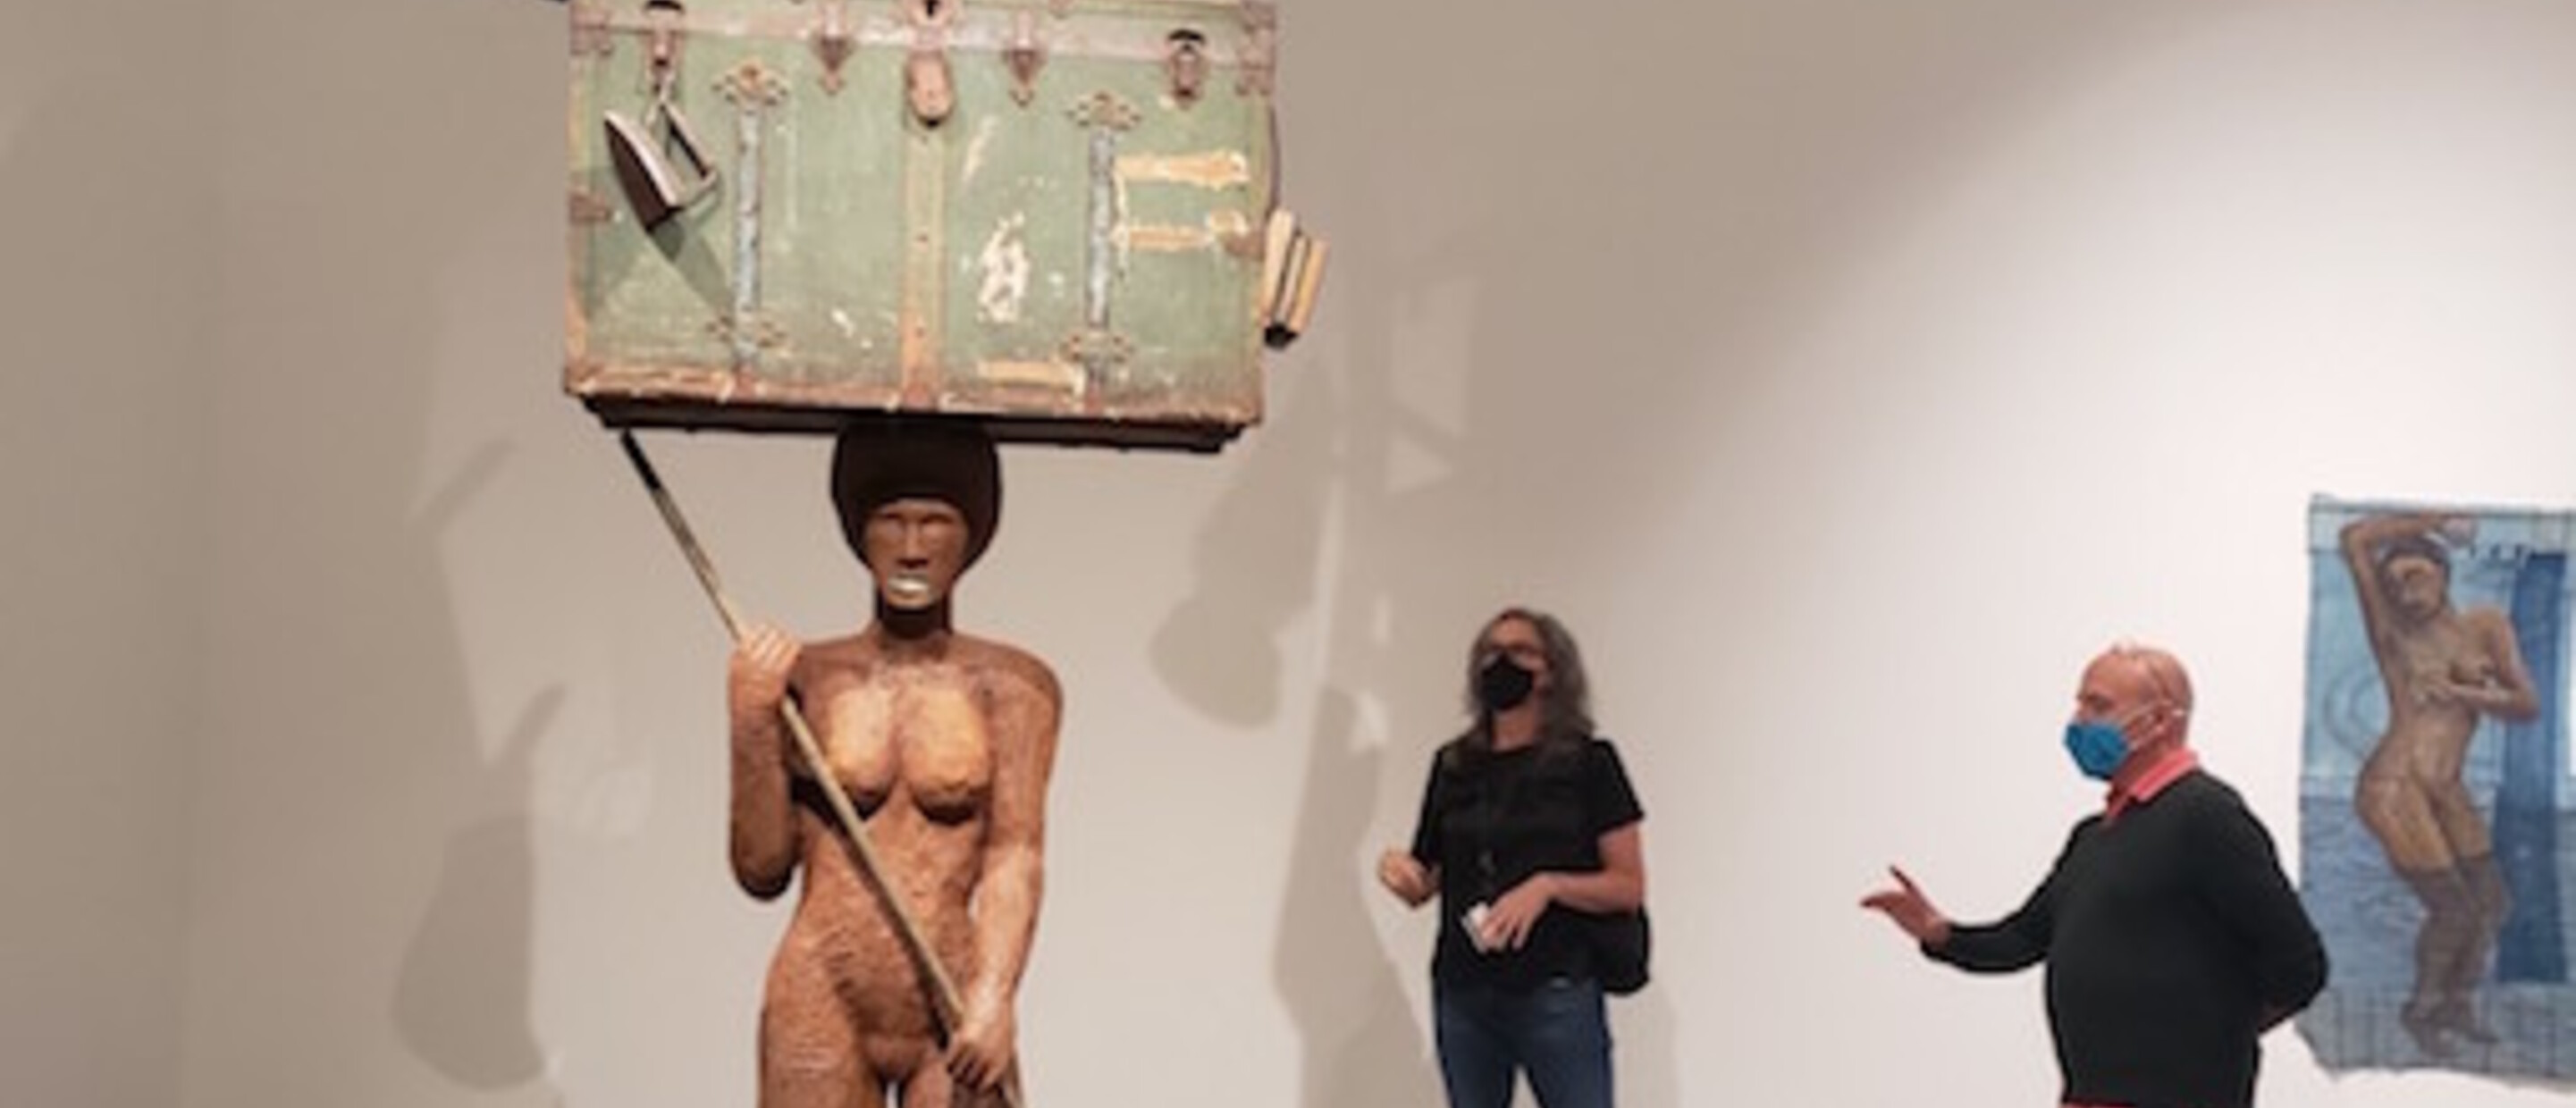 2 people standing with a large sculpture inside a museum gallery